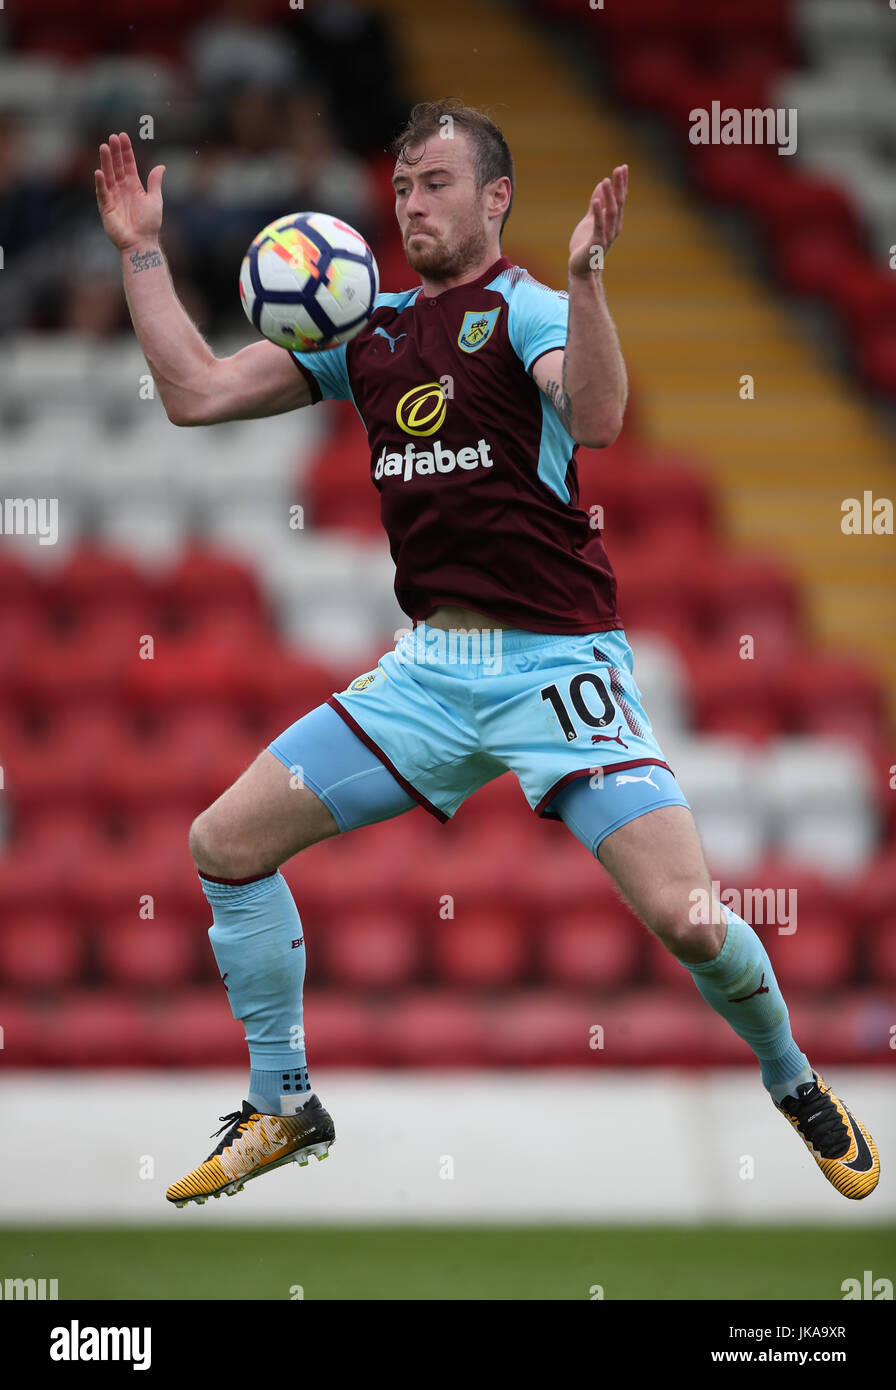 Burnley's Ashley Barnes during the pre-season friendly match at Aggborough, Kidderminster. PRESS ASSOCIATION Photo. Picture date: Saturday July 22, 2017. See PA story SOCCER Kidderminster. Photo credit should read: Nick Potts/PA Wire. RESTRICTIONS: No use with unauthorised audio, video, data, fixture lists, club/league logos or 'live' services. Online in-match use limited to 75 images, no video emulation. No use in betting, games or single club/league/player publications. Stock Photo